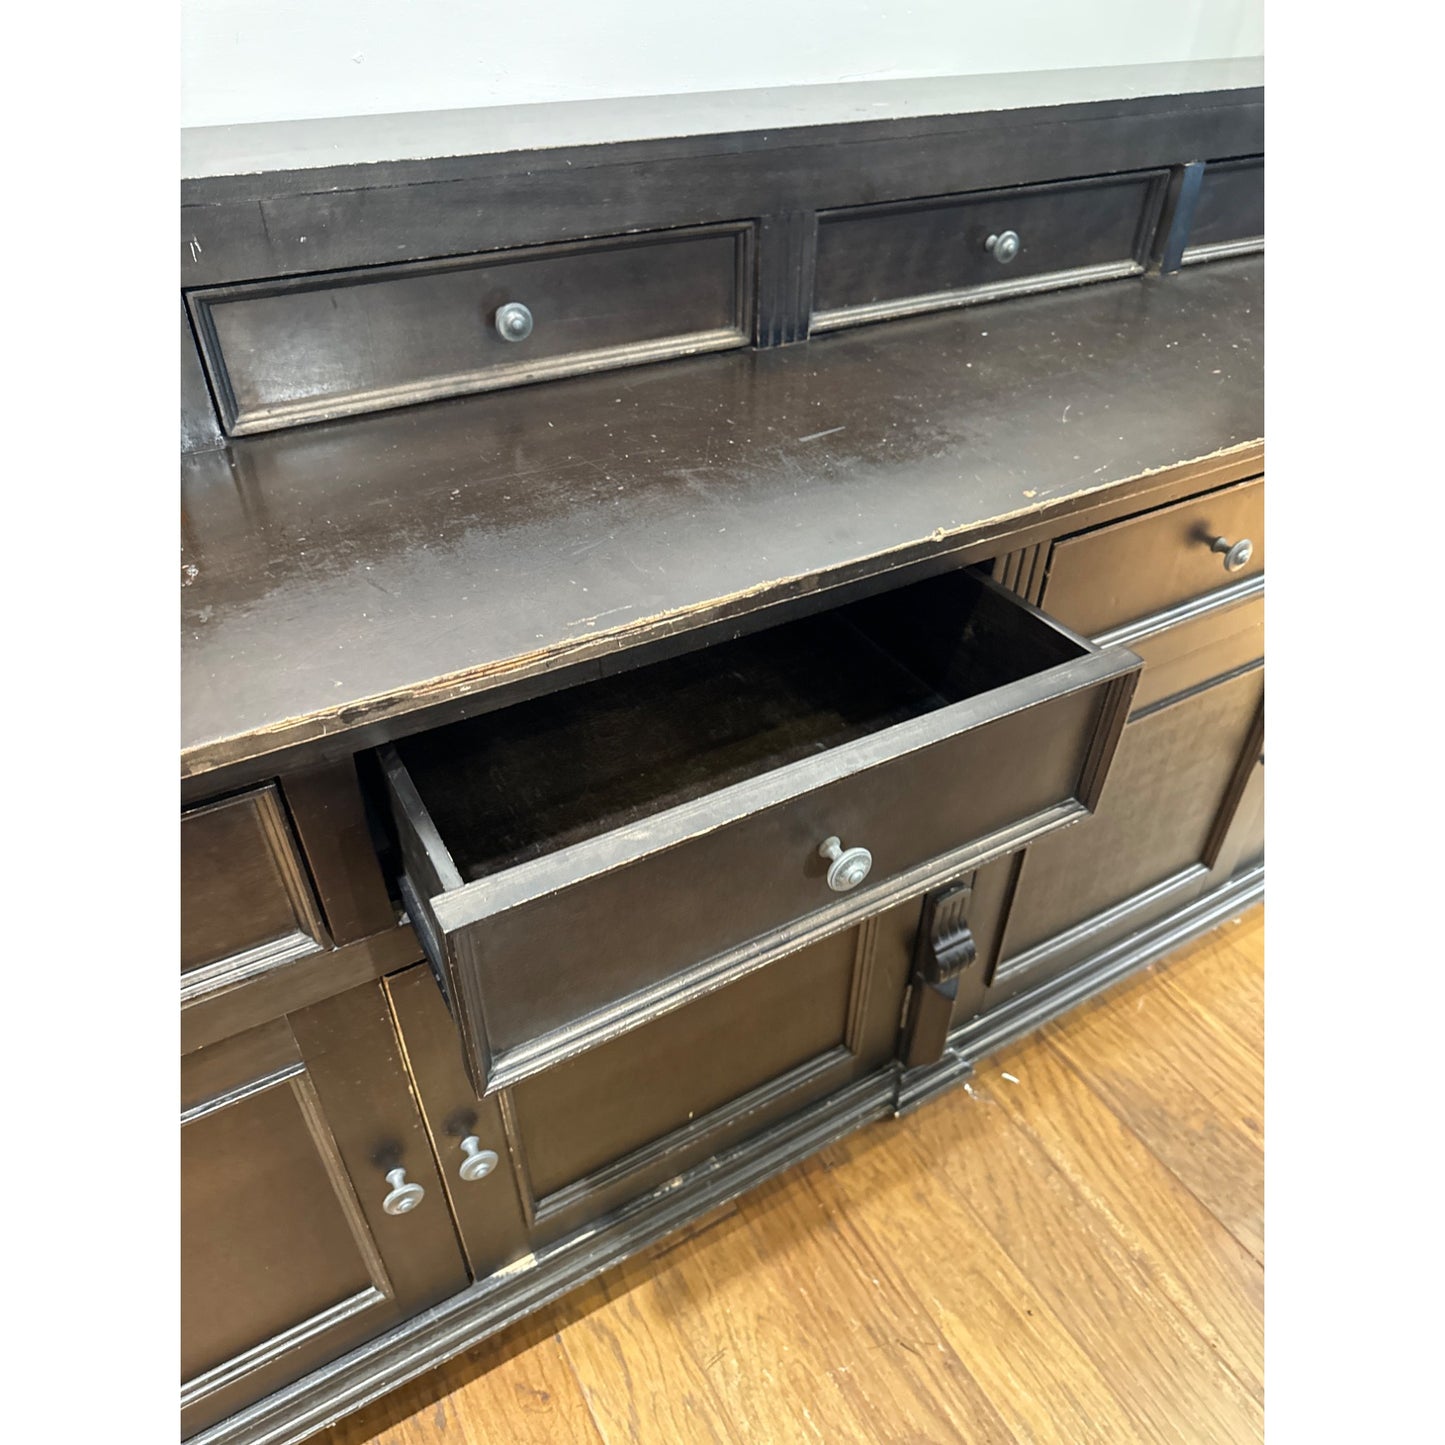 Counter Top with Drawers